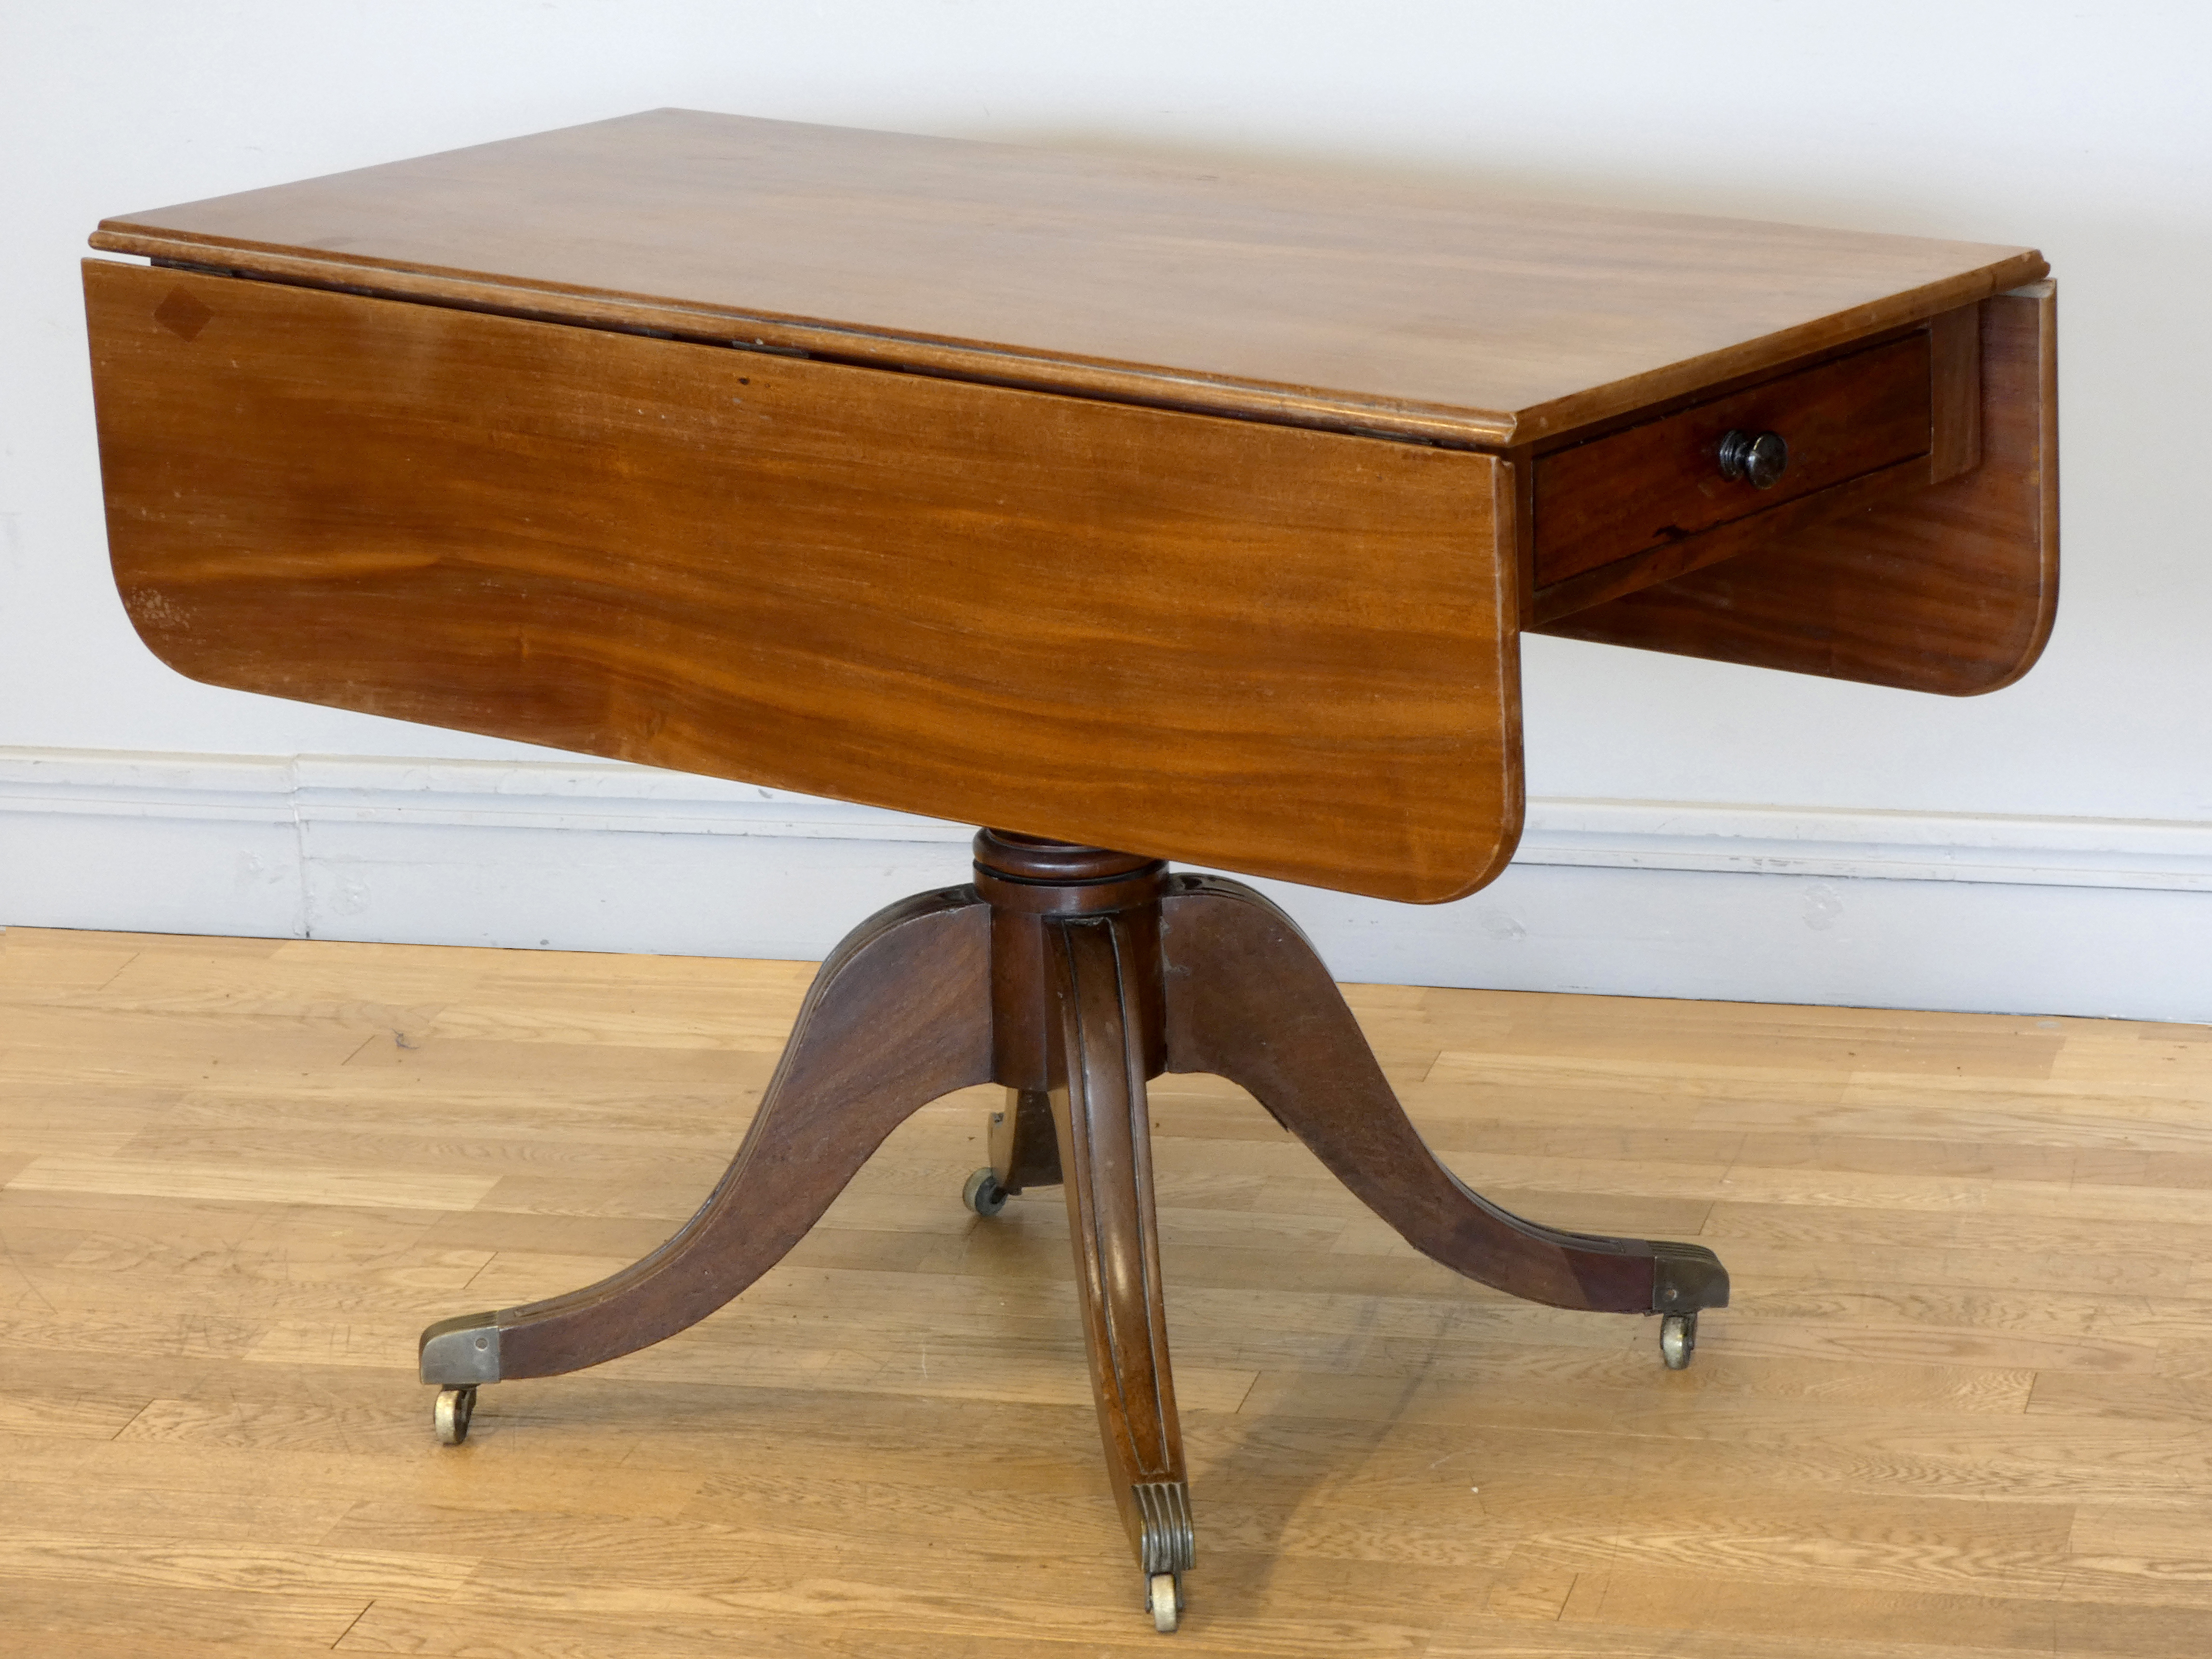 An early 19th century mahogany sofa table, raised on a turned pedestal, to a quatrefoil base, drawer